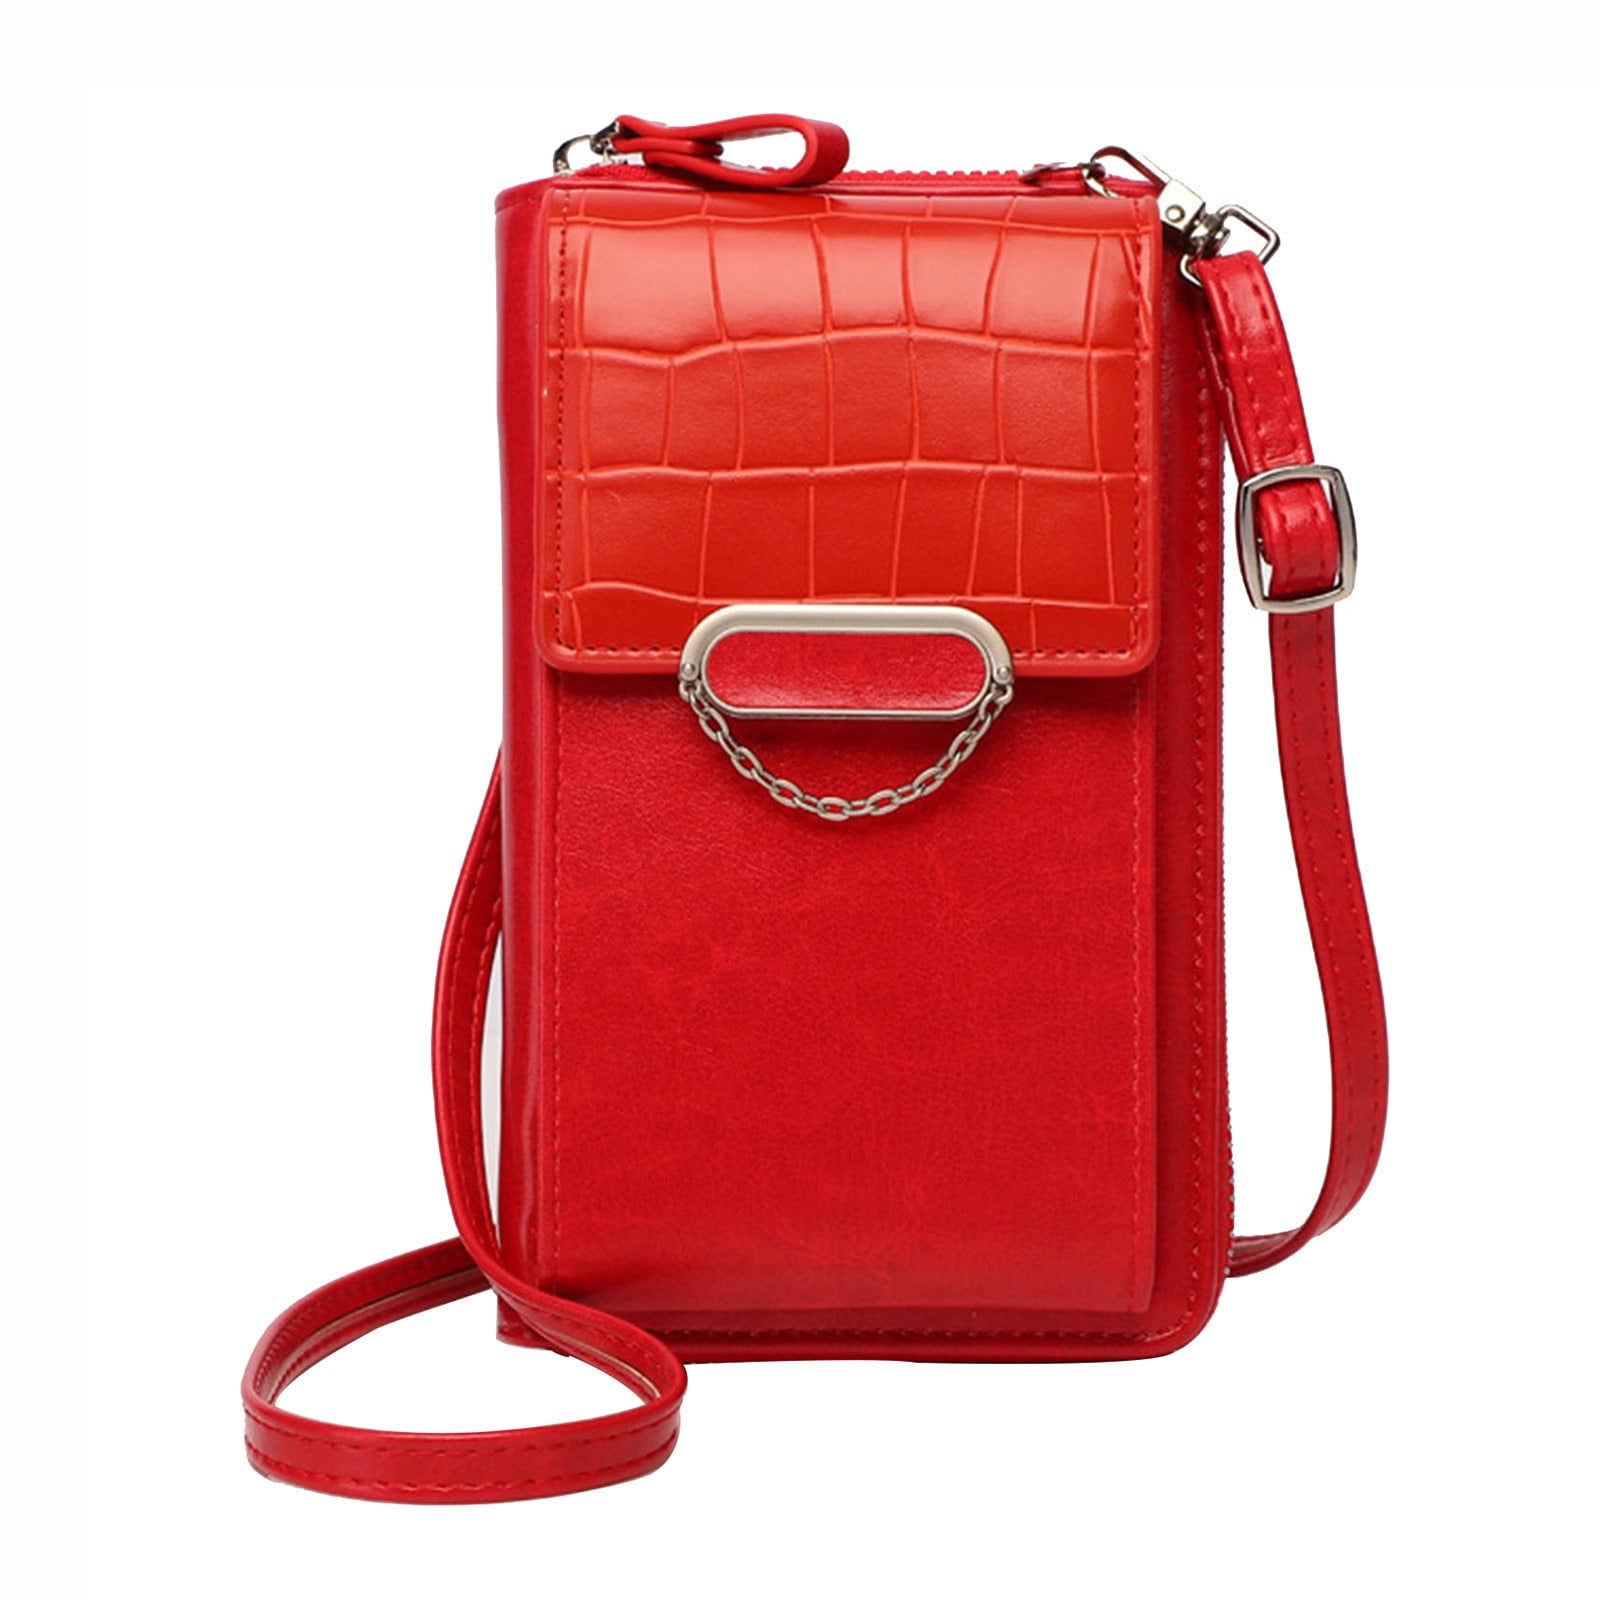 Vertical Crossbody Satchel - Womens Leather Shoulder Bag with